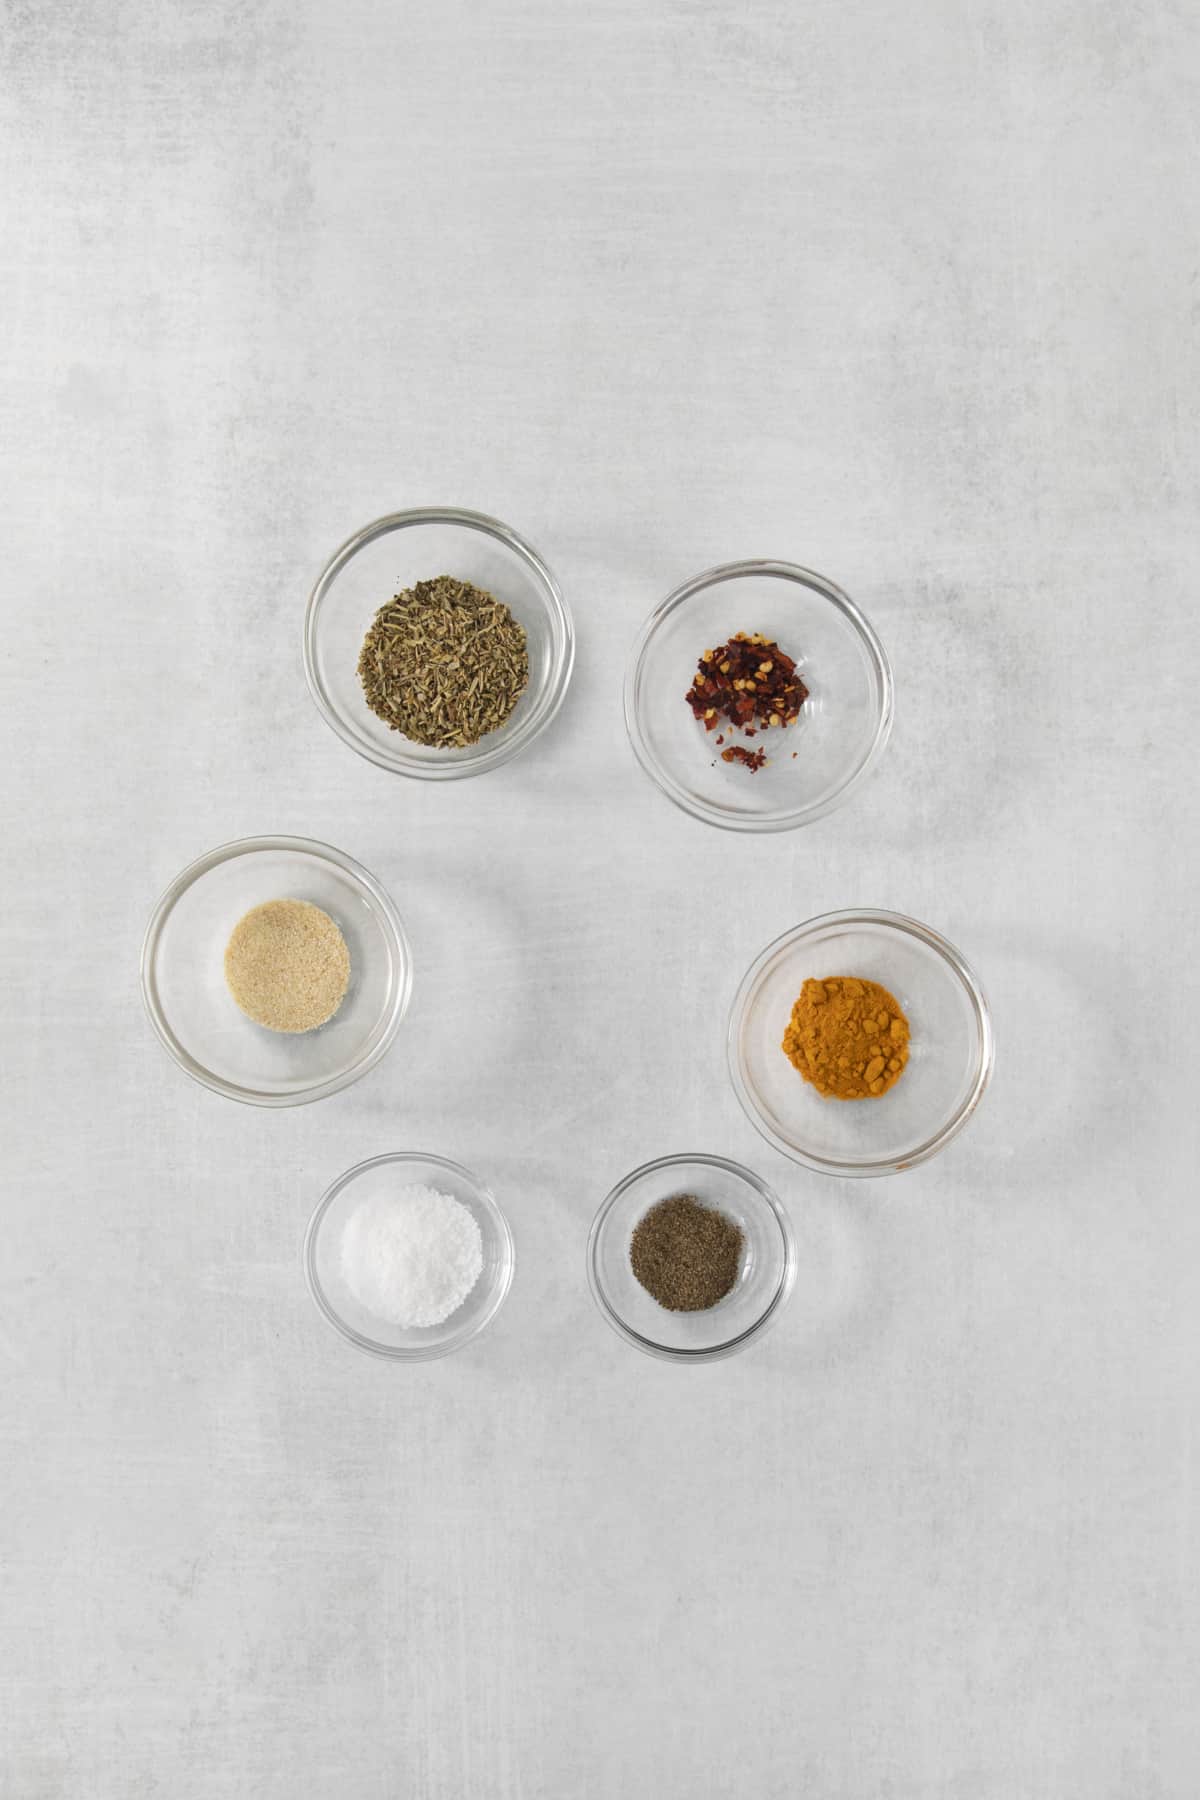 Overhead of different bowls of seasoning rubbed with spices.